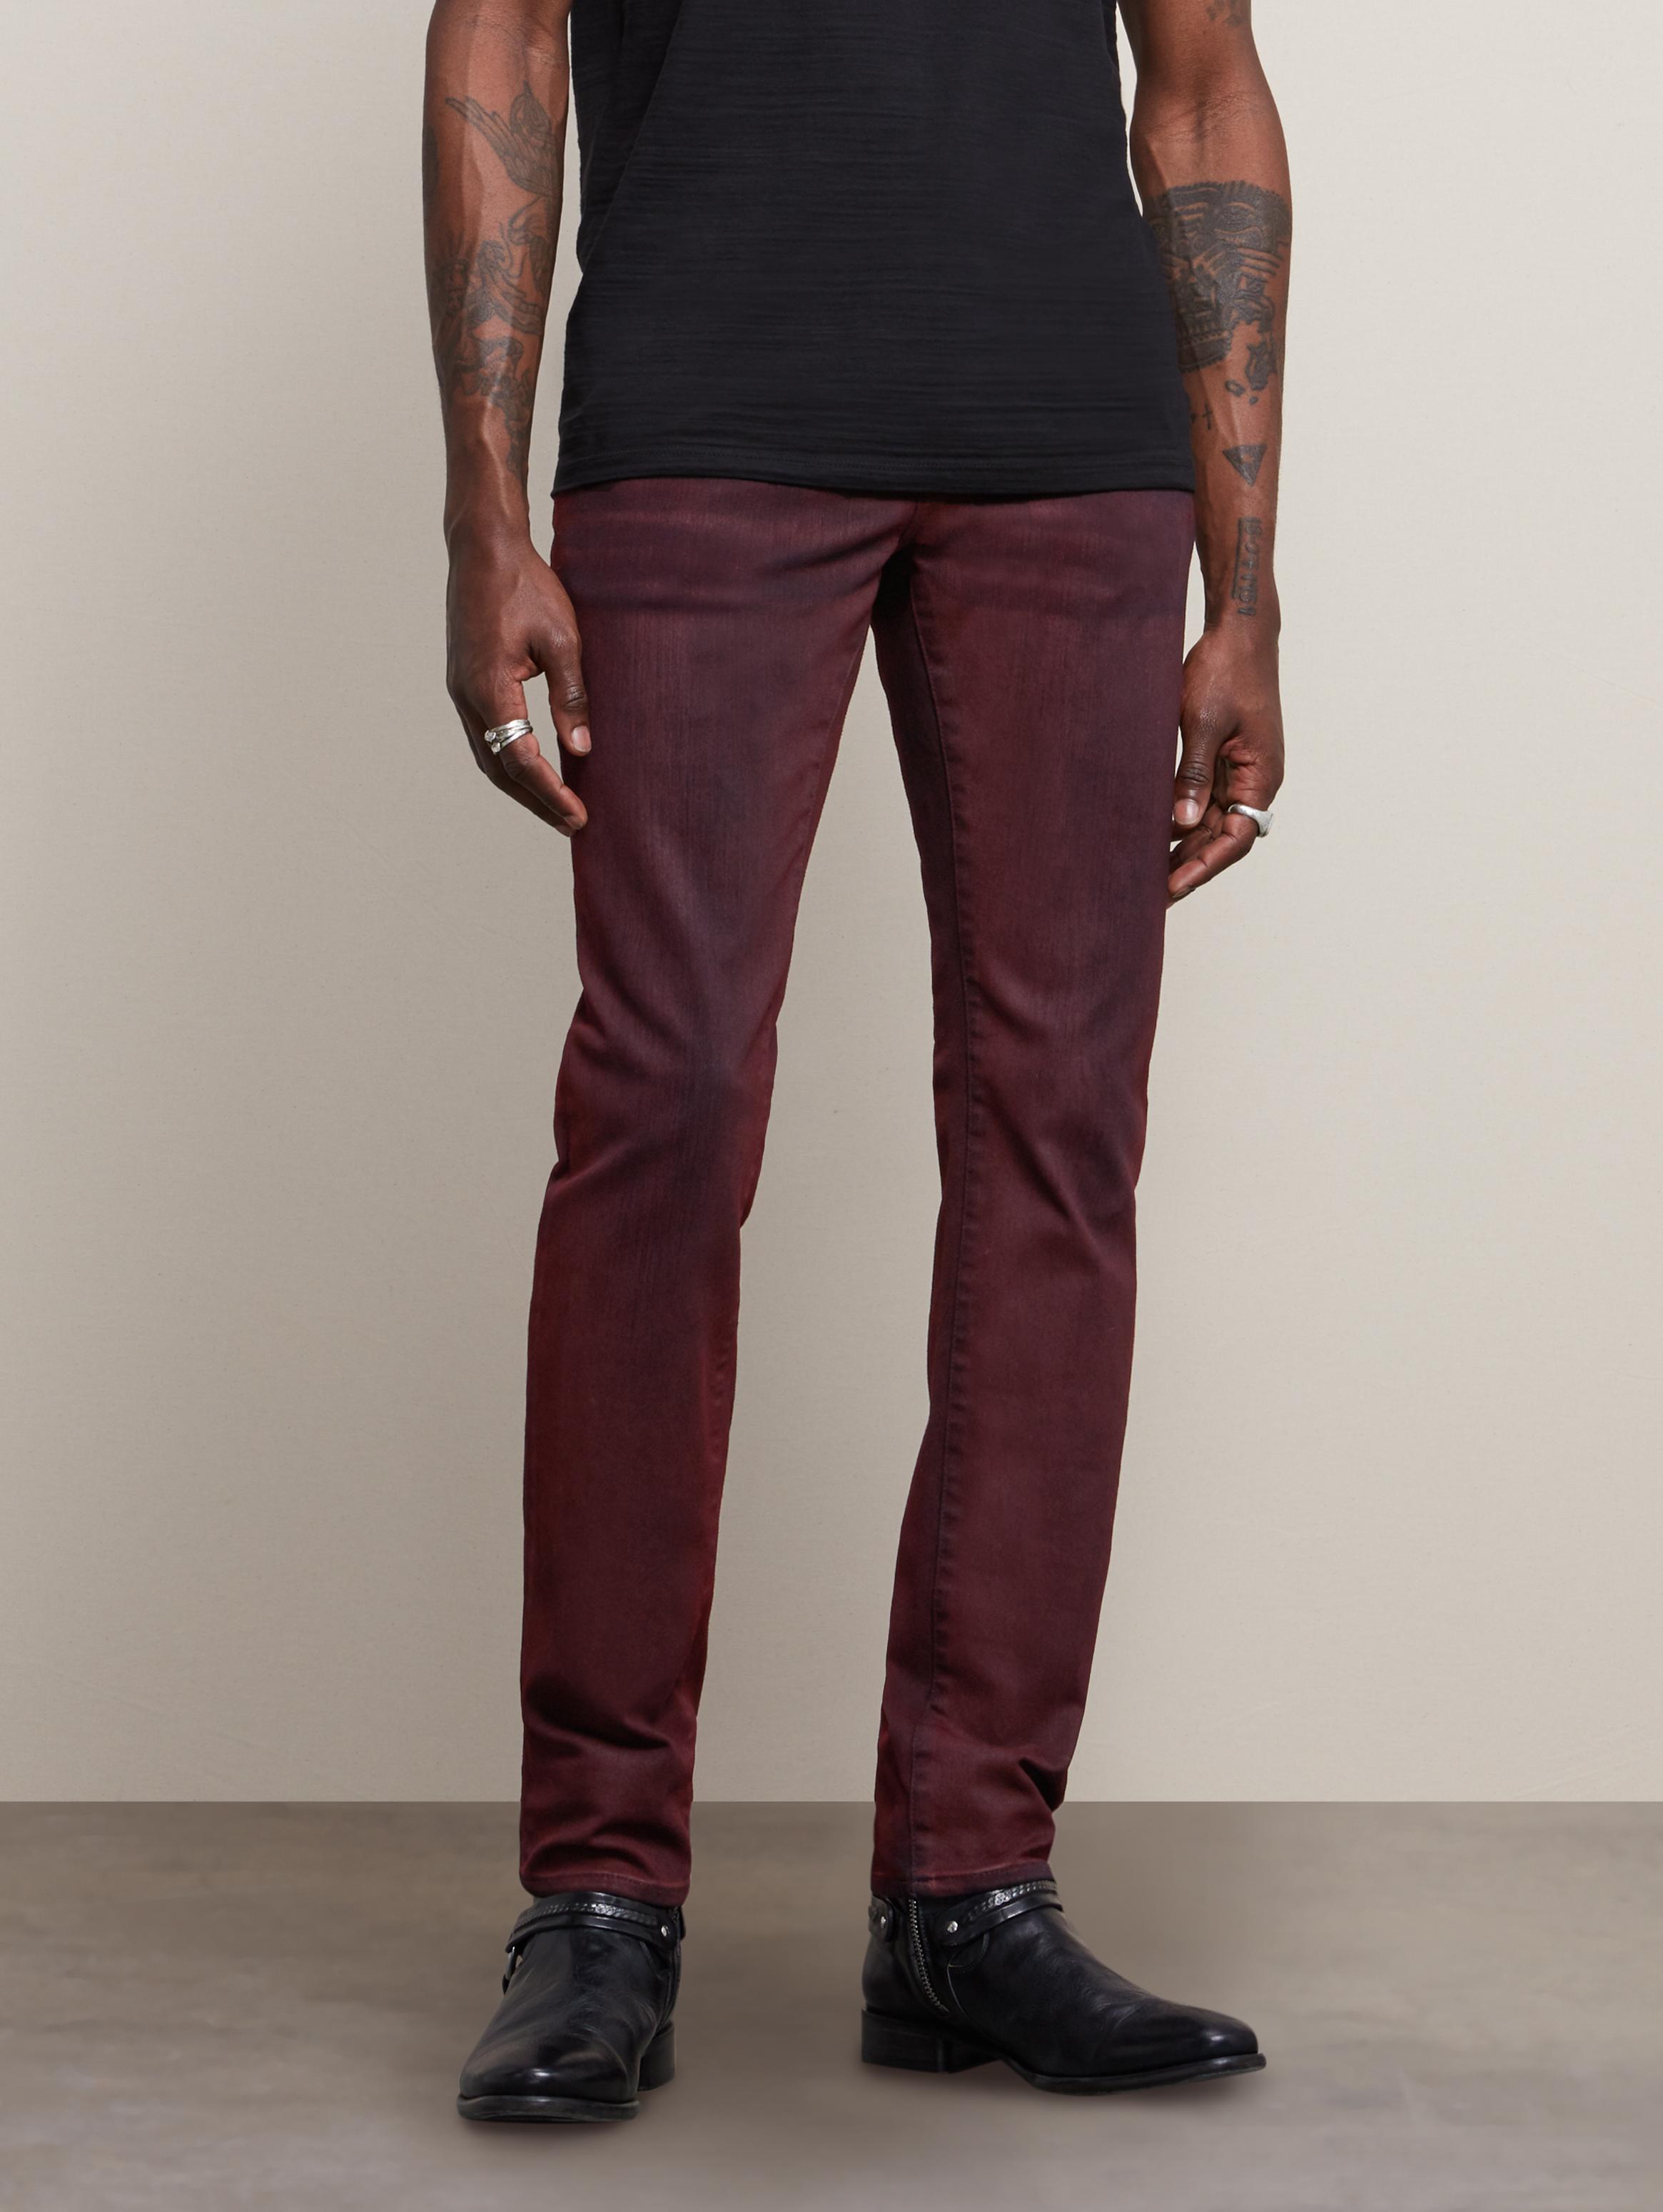 WIGHT SKINNY STRAIGHT FIT JEAN - GREGORY WASH image number 1